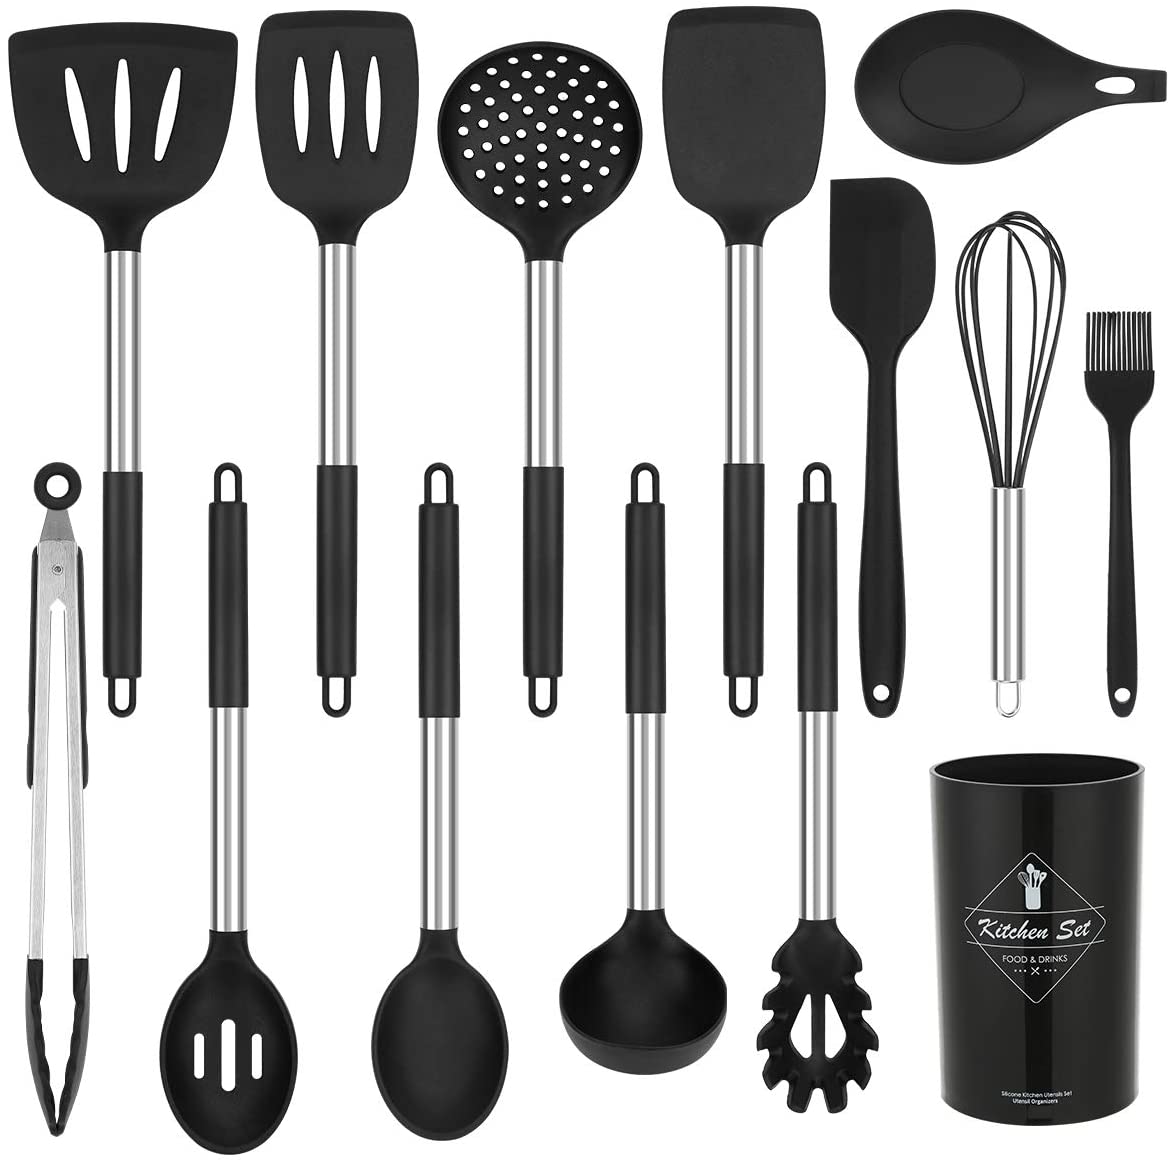 10-Piece Silicone Kitchen Utensil Set Non-Stick Heat-Resistant Cooking Tools